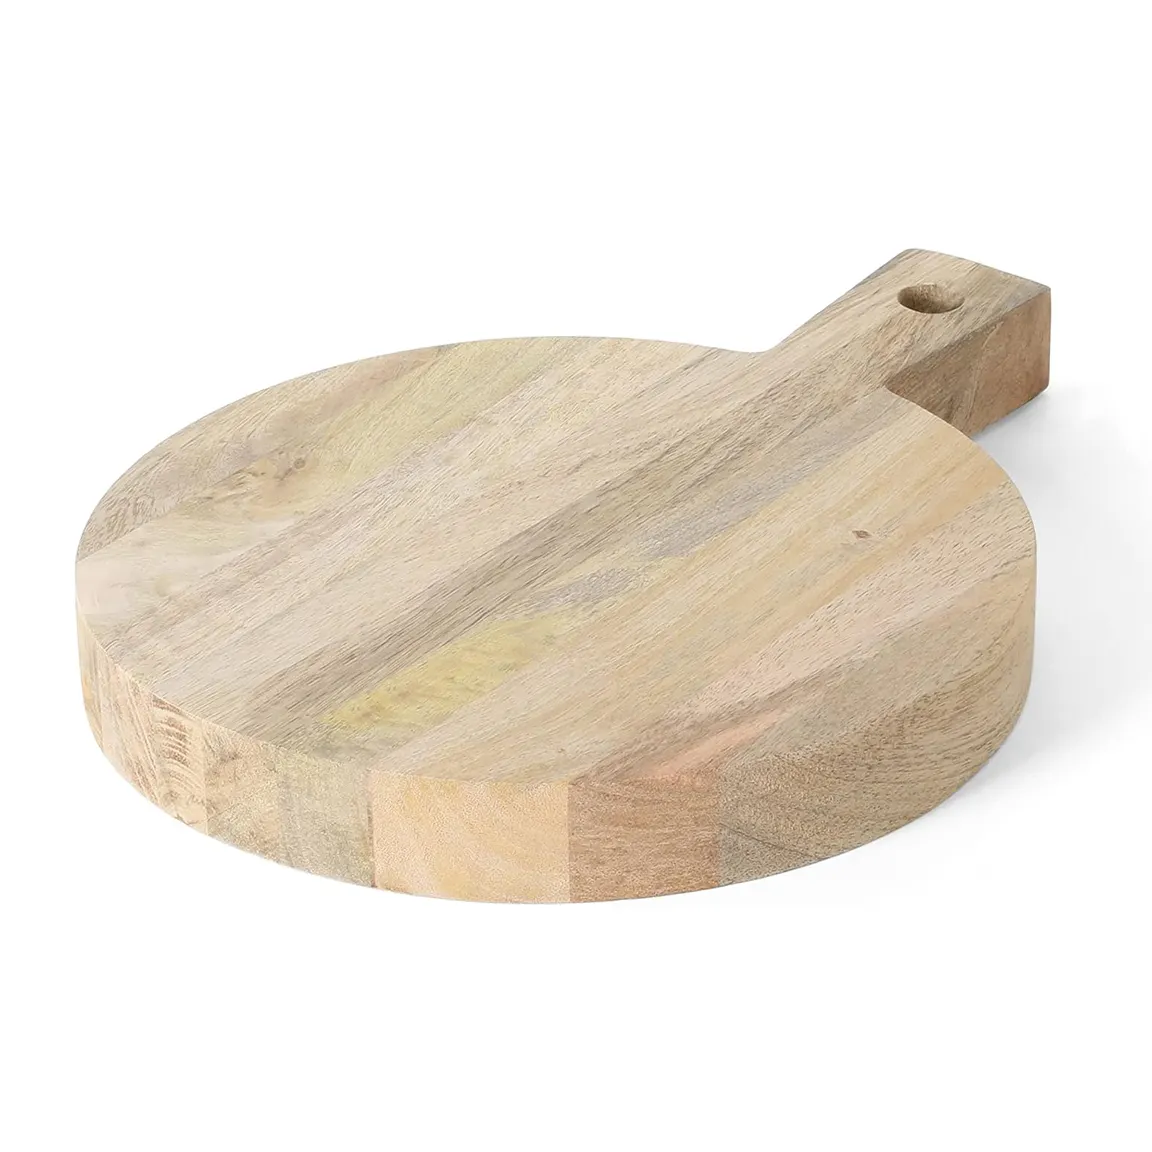 Handmade Masterpiece Round Wood Charcuterie/Cutting Board with Handle To Elevate Culinary Presentations at Wholesale Price